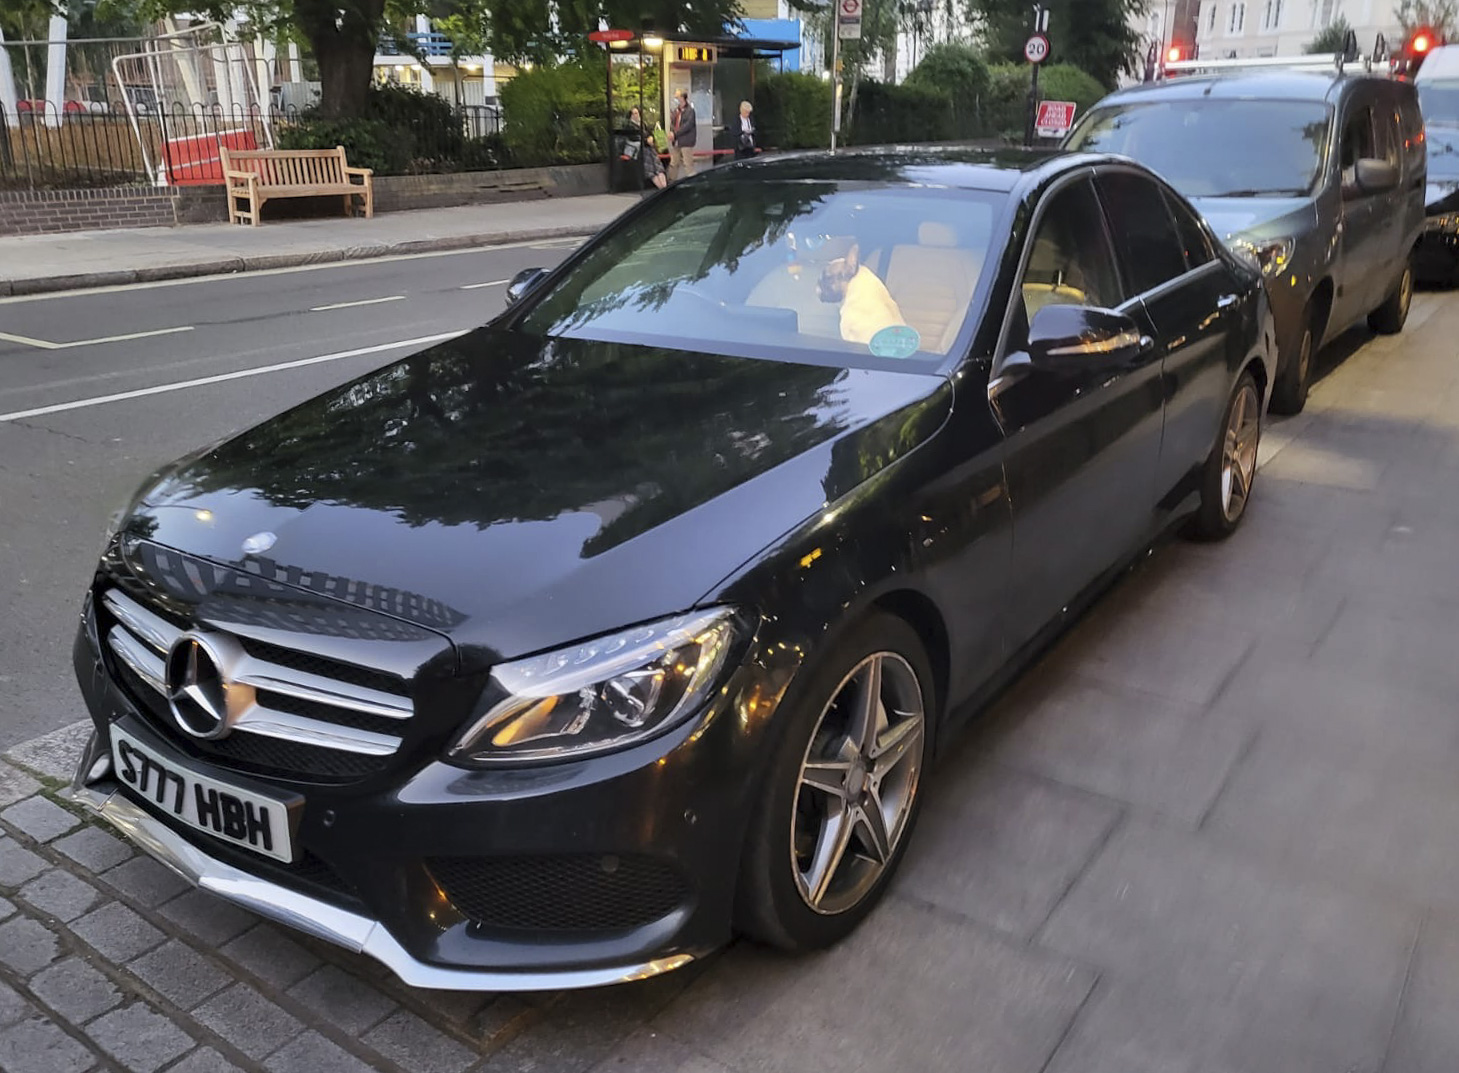 Mercedes-Benz C-Class Saloon C300 BlueTEC Hybrid which passed ULEZ compliance, according to a TfL website